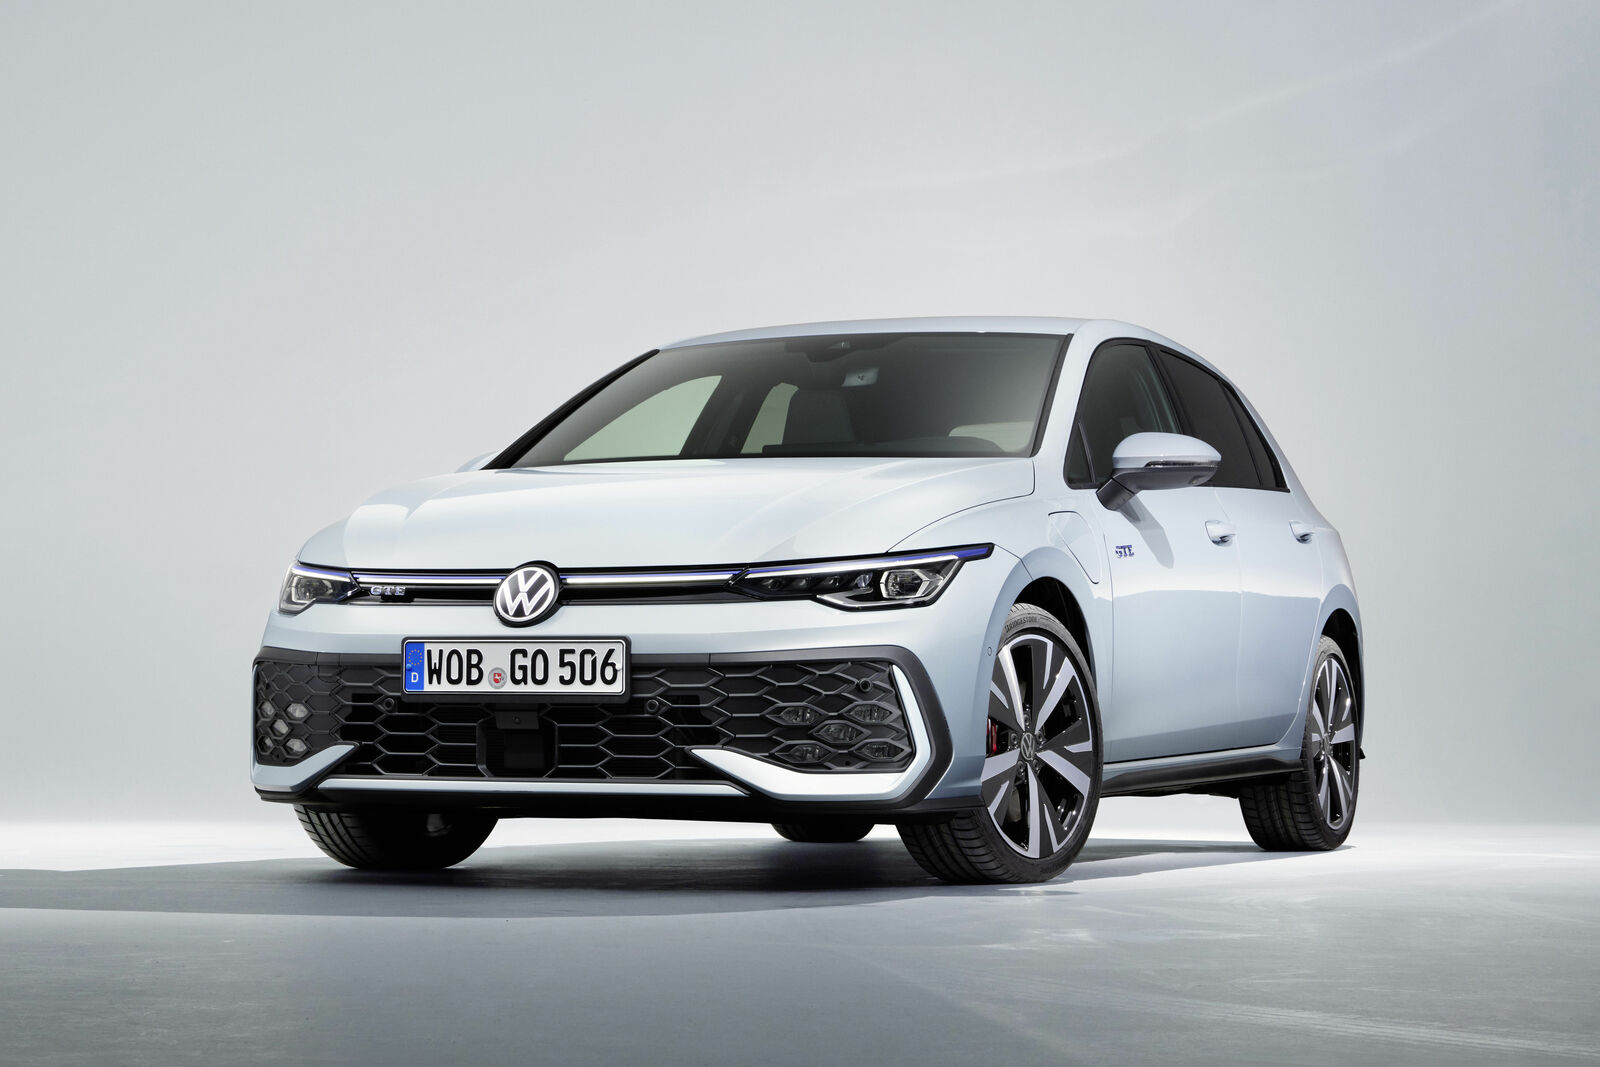 The new Golf with a new front design and light graphics.